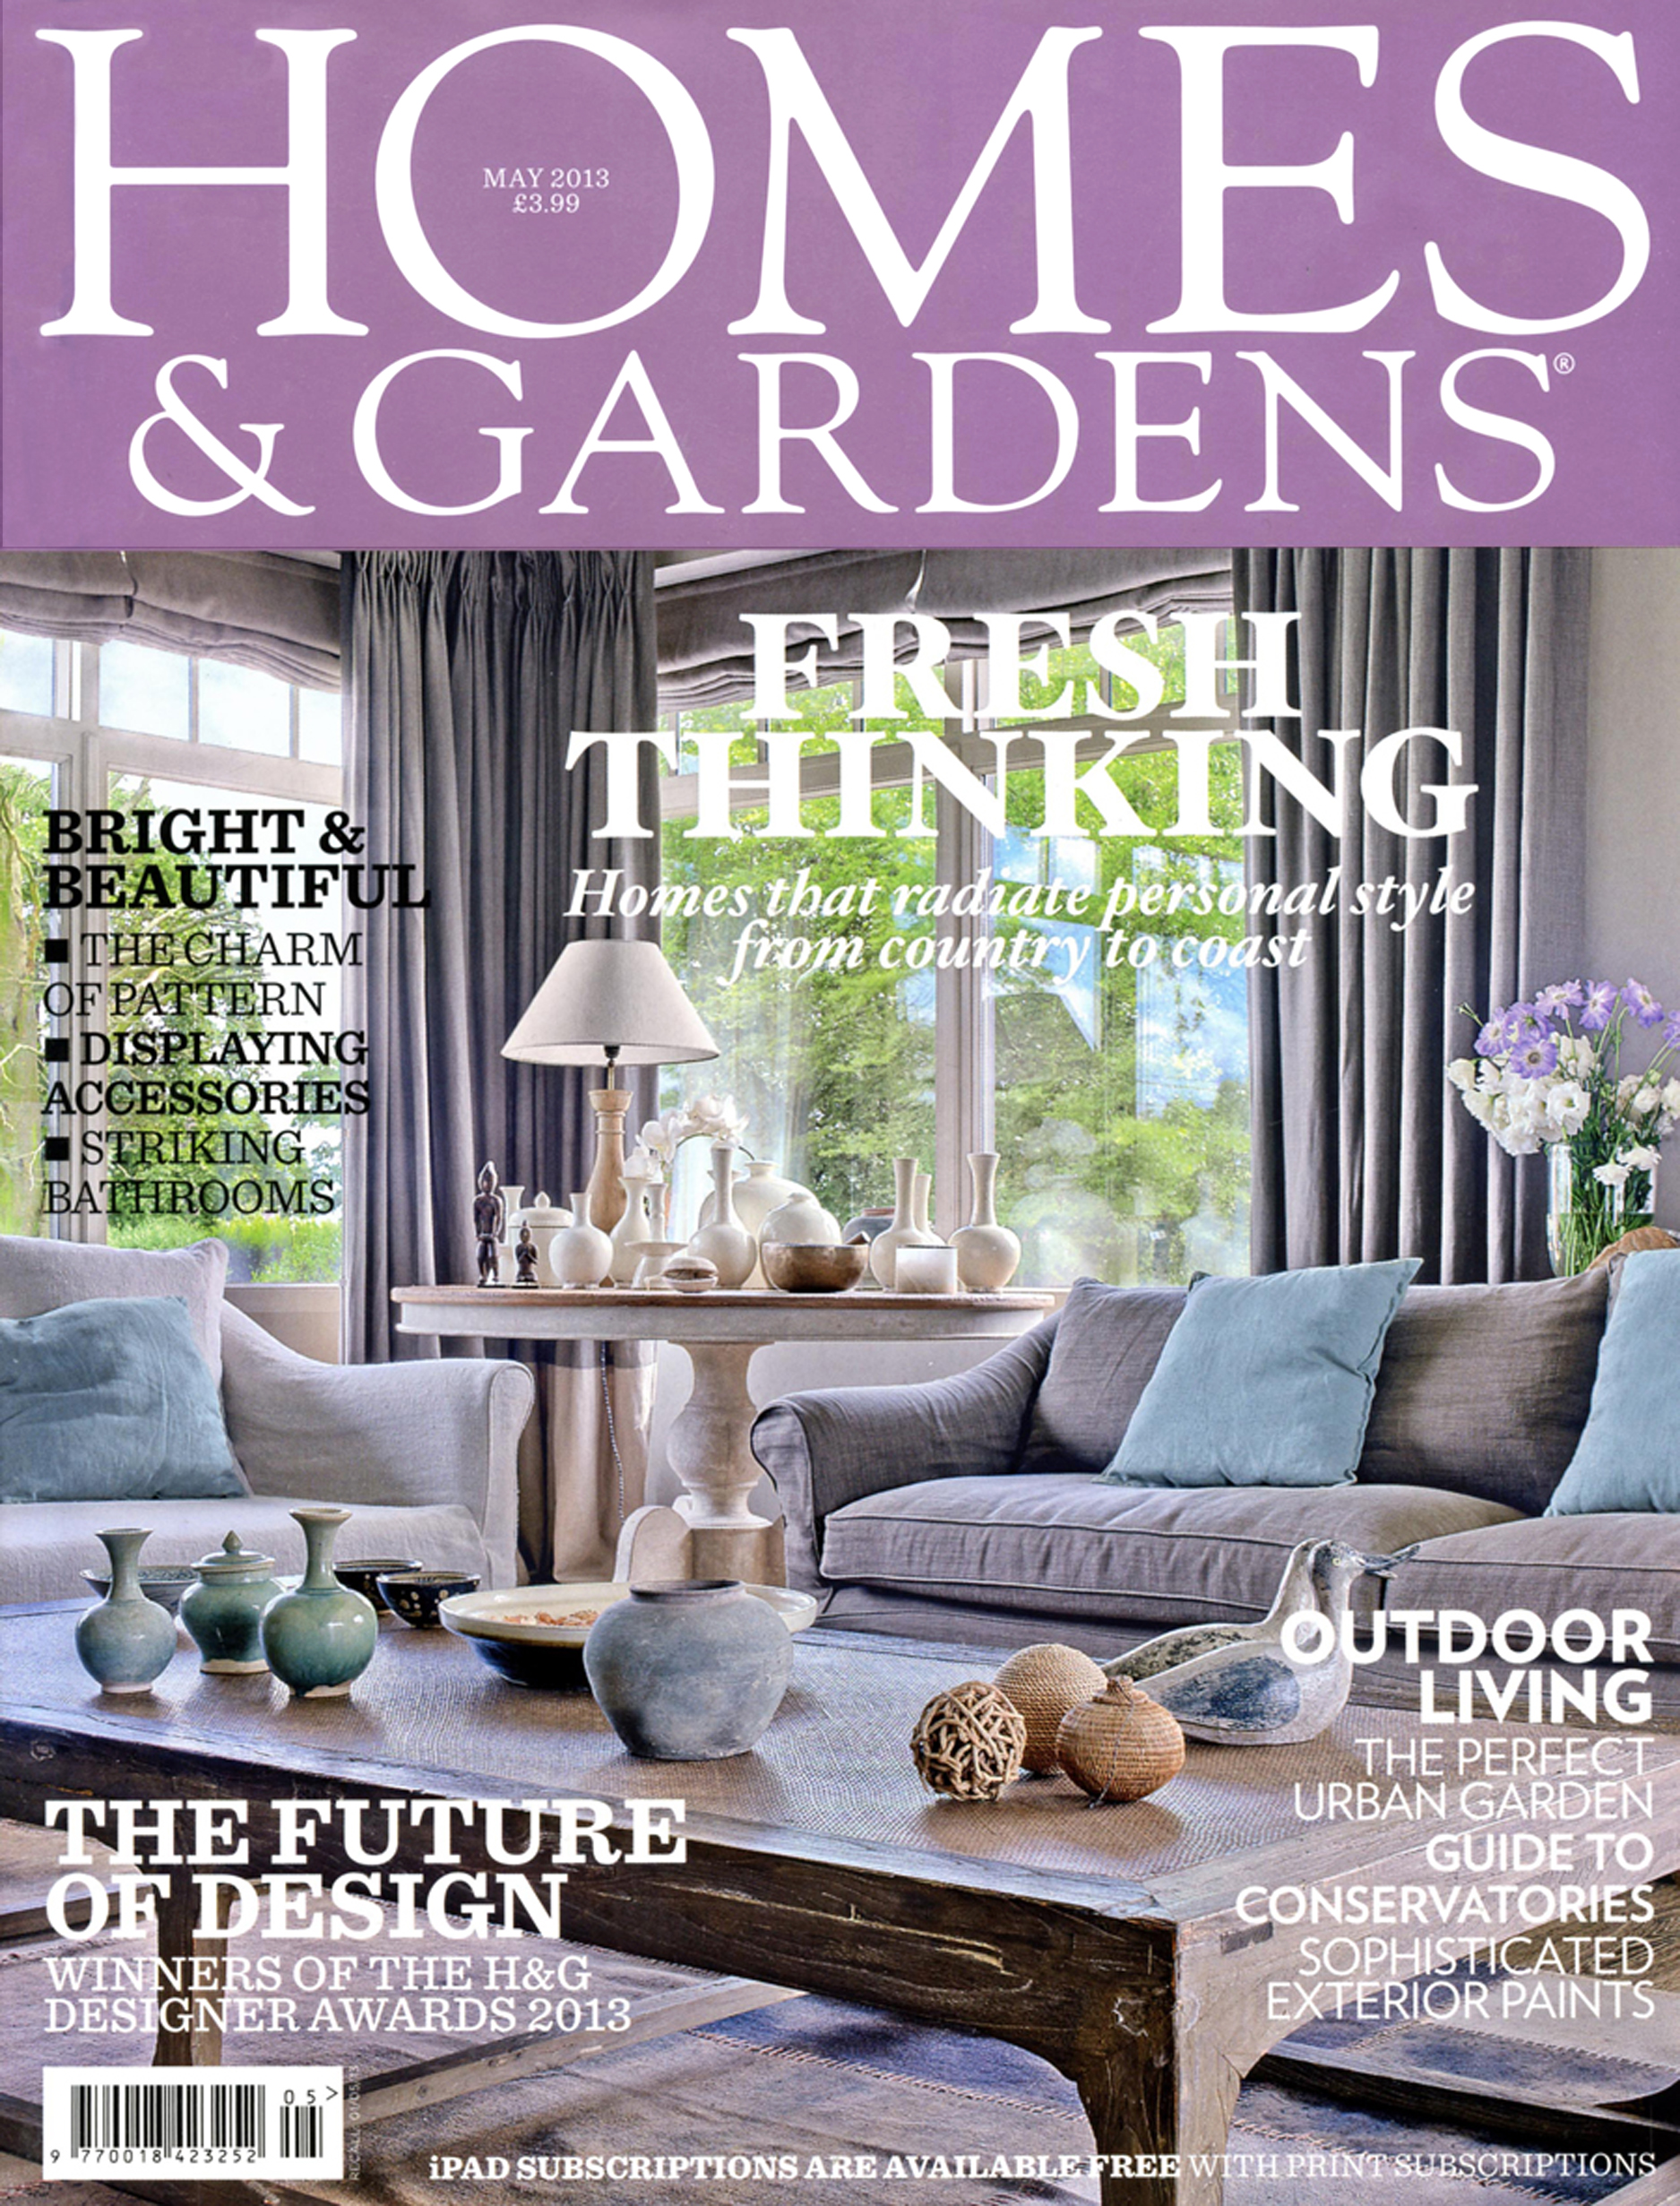 Homes and Gardens magazine Kingham bespoke kitchen design feature May 2013